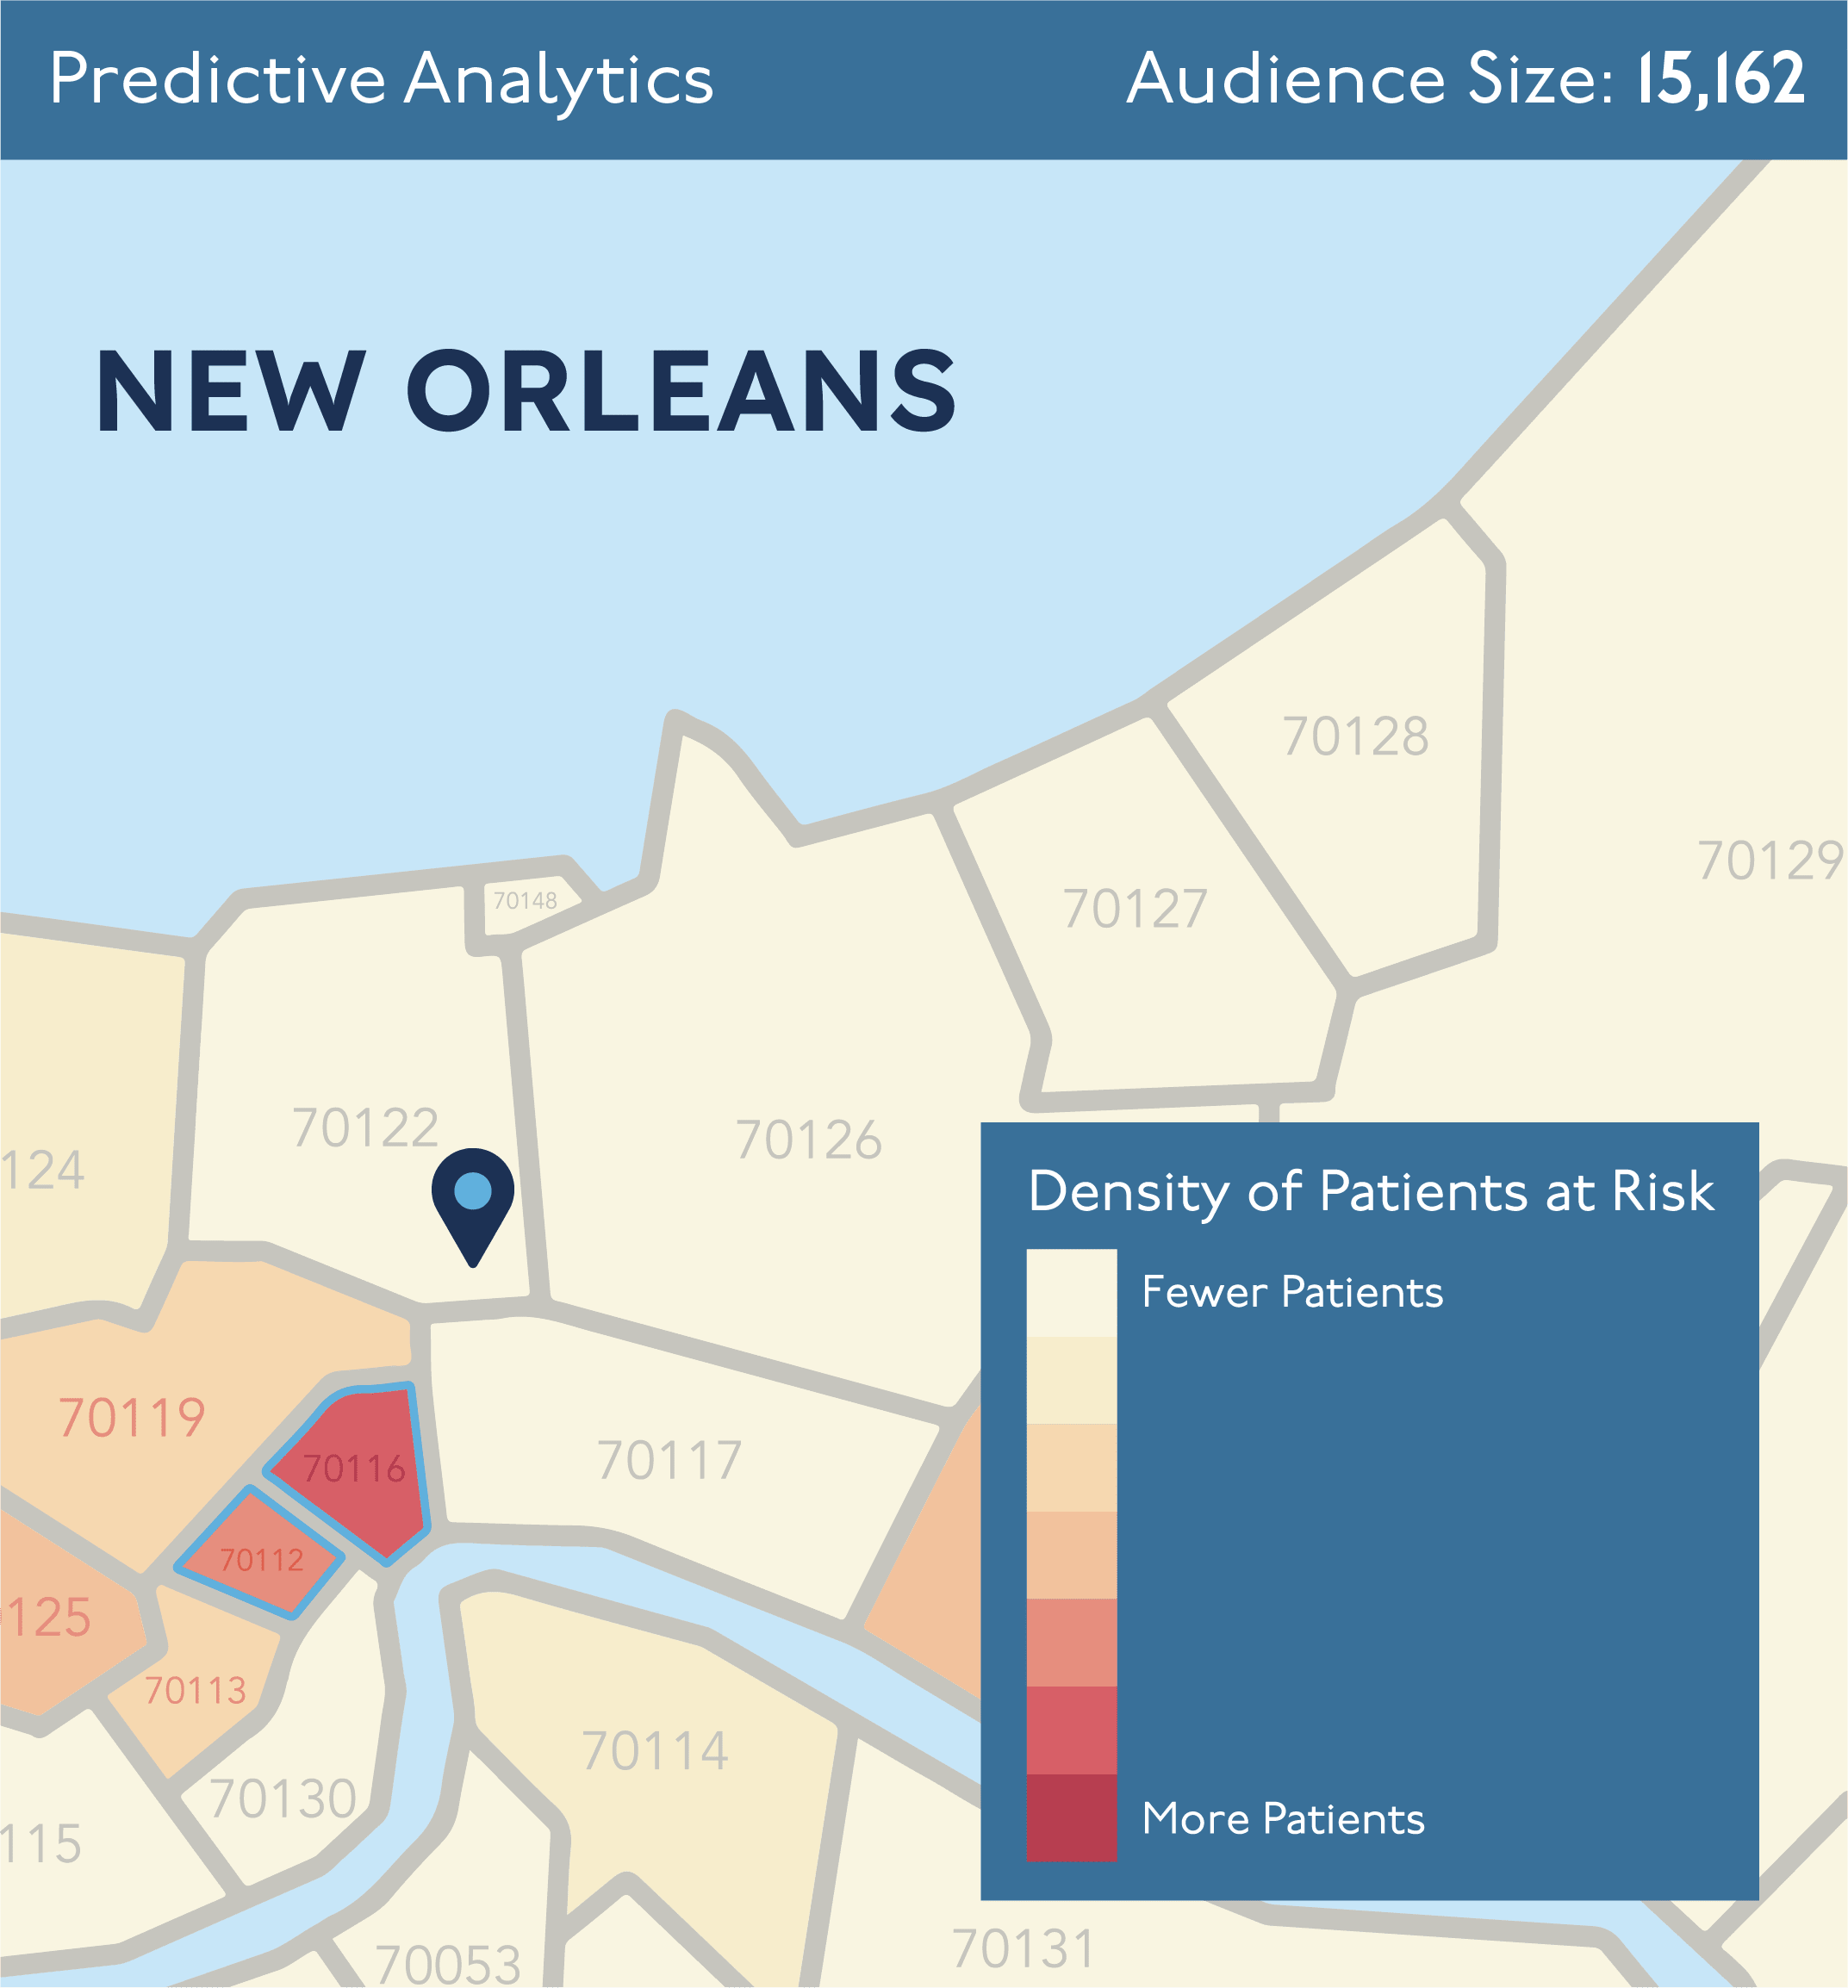 A map of New Orleans segmented by zip codes, showing the density of patients at risk in different areas.